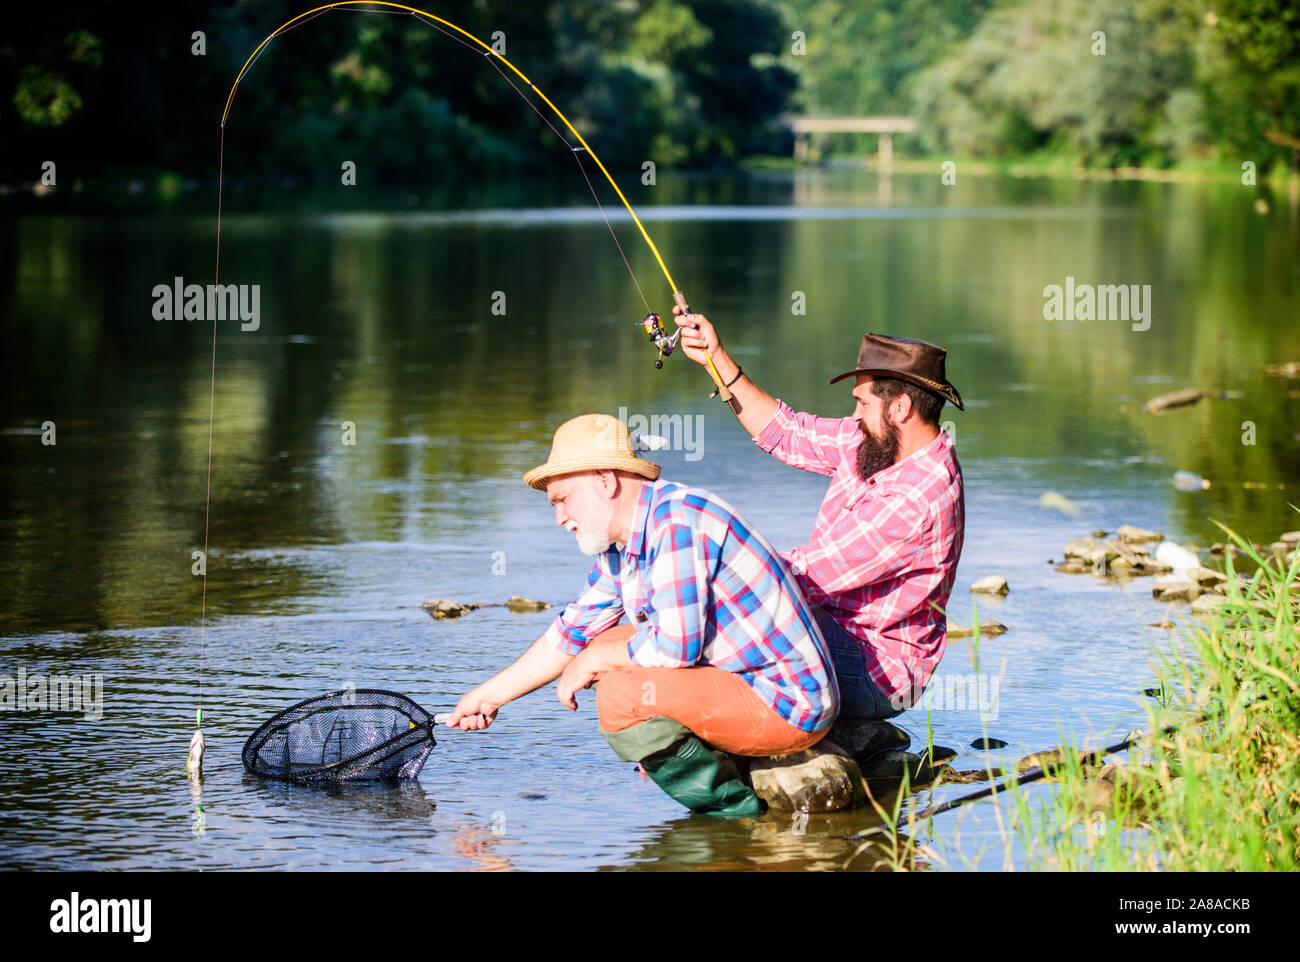 https://c8.alamy.com/comp/2A8ACKB/hunting-happy-fishermen-friendship-catching-and-fishing-two-male-friends-fishing-together-retired-dad-and-mature-bearded-son-fly-fish-hobby-of-men-in-checkered-shirt-retirement-fishery-2A8ACKB.jpg